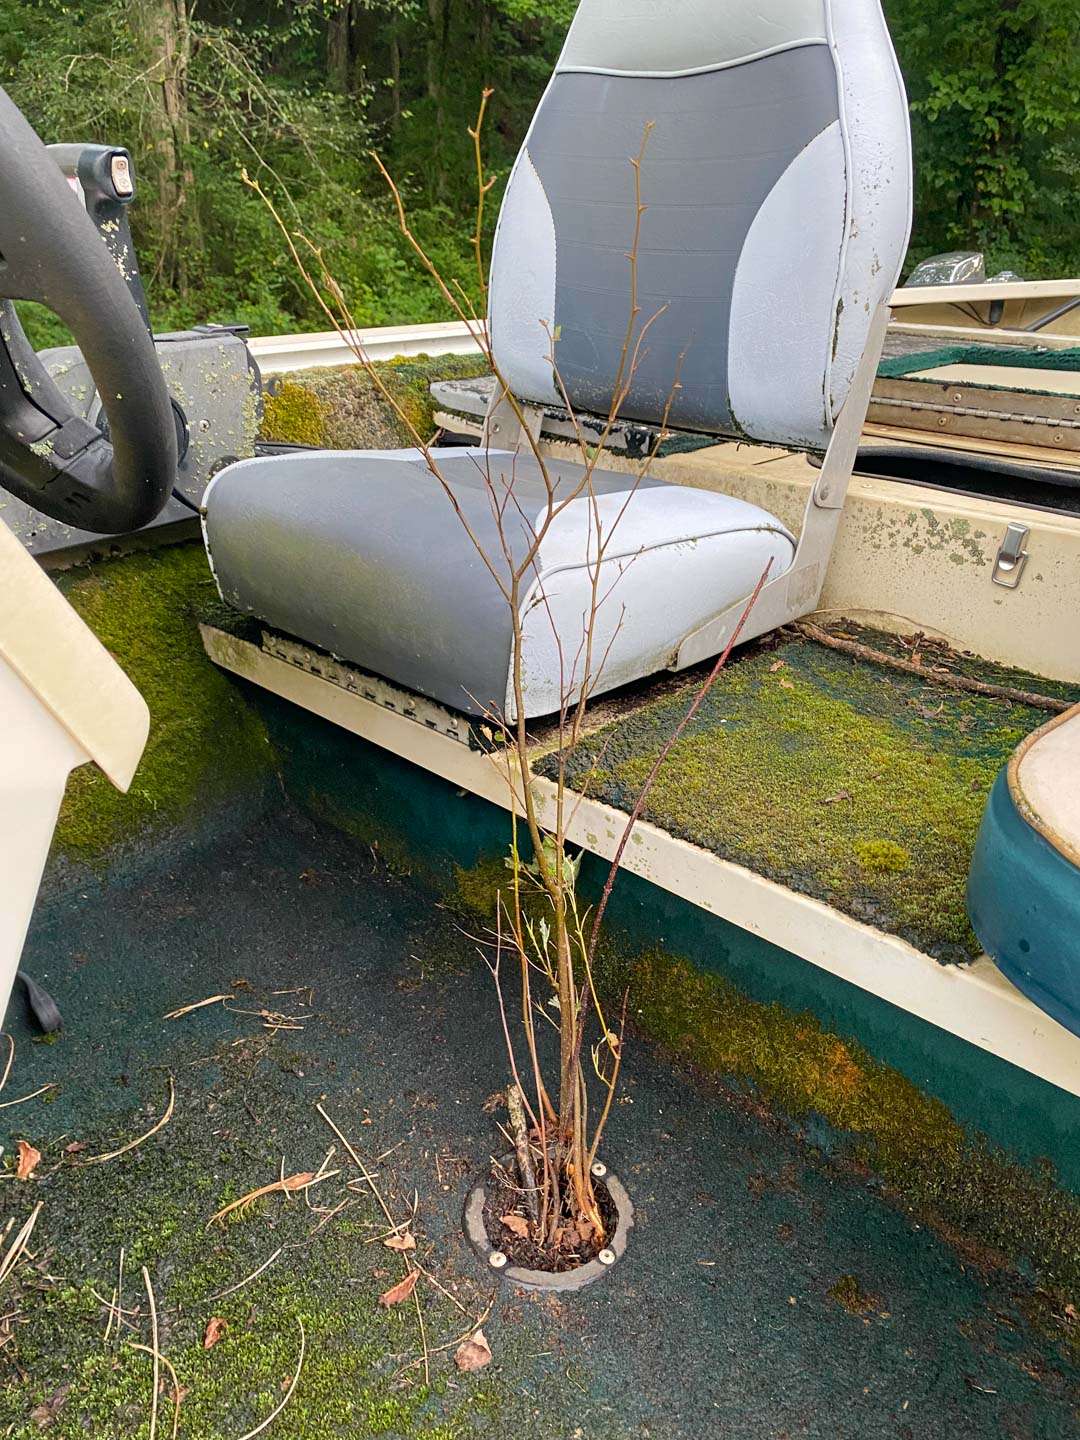 My favorite aspect of this boat was the small tree growing in the middle of it. The cupholder must have filled with dirt and the tree took root through the drain hole. 